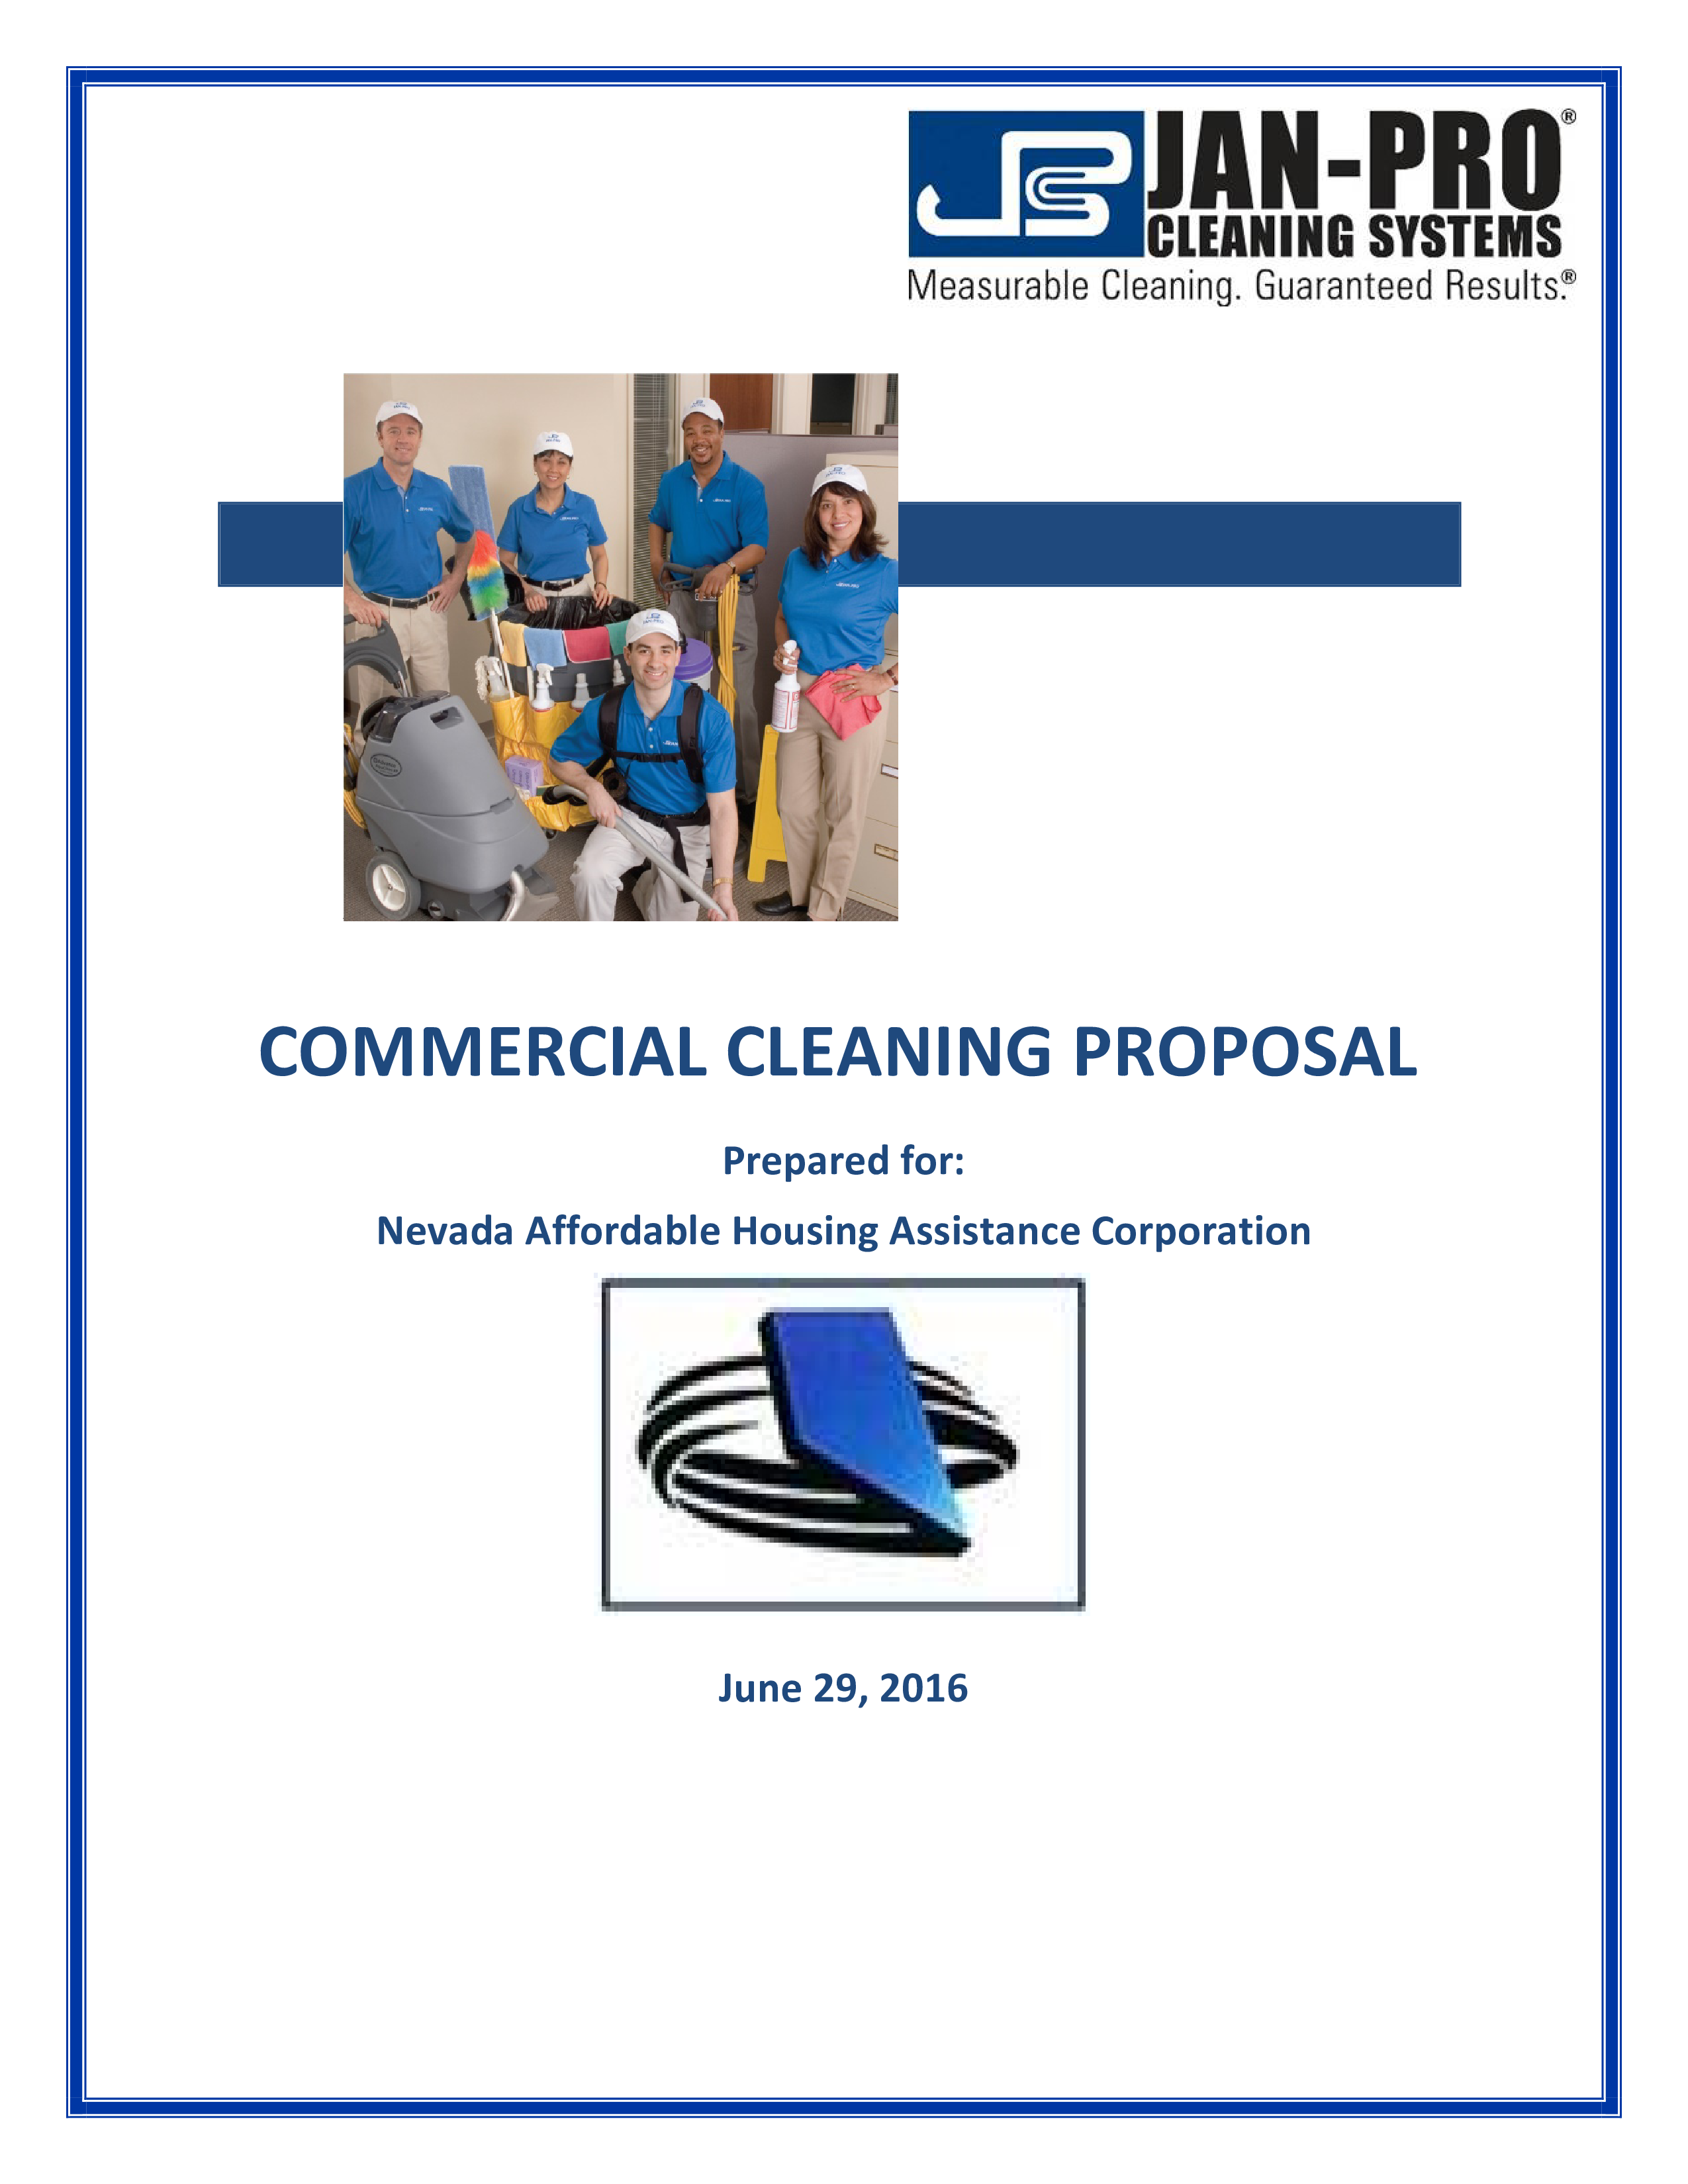 Commercial Cleaning Service Proposal Templates at